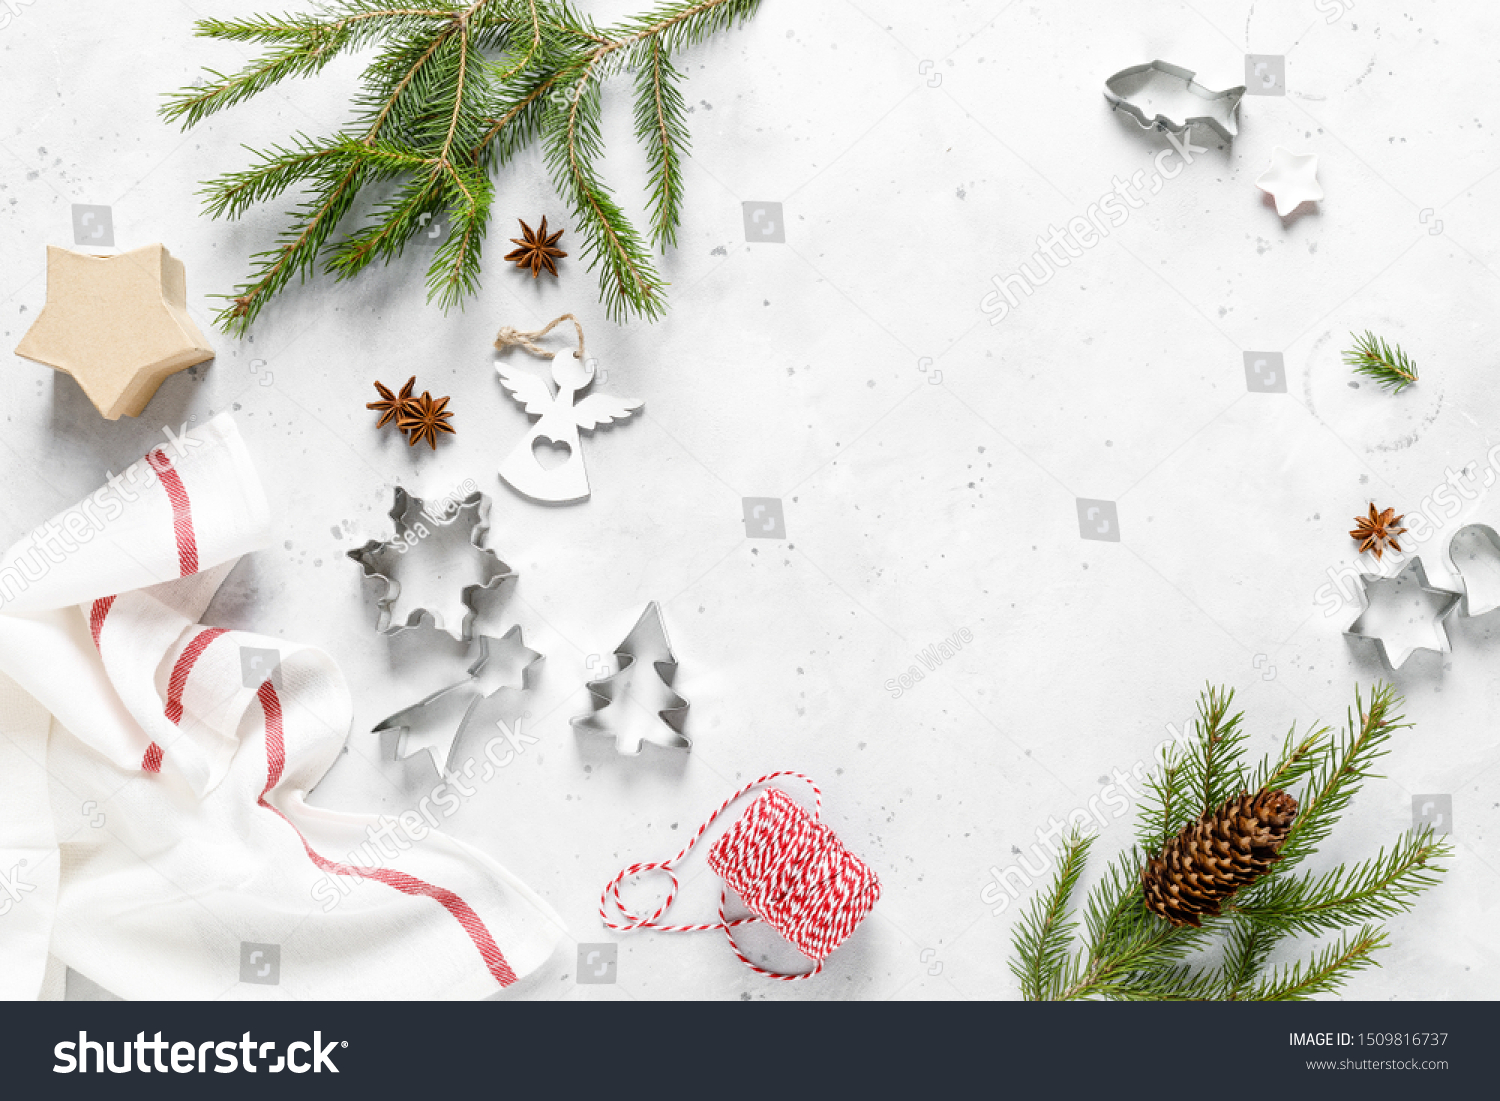 Christmas, Noel or New Year food flat lay background with xmas decorations and fir tree #1509816737